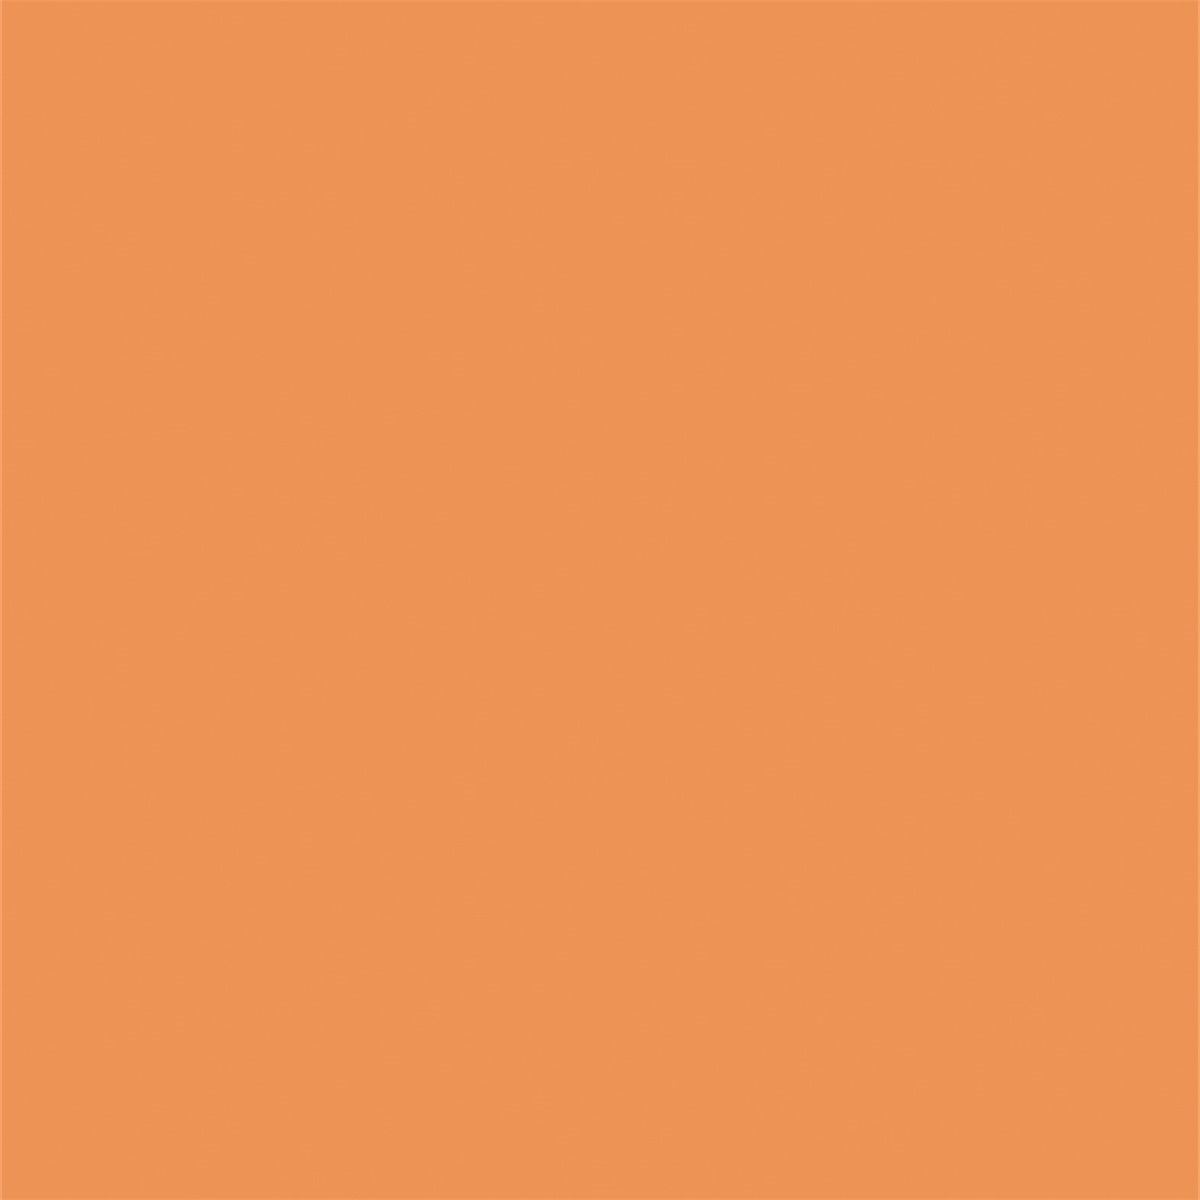 Orange Fabric Solid Backdrops for Photography Prop